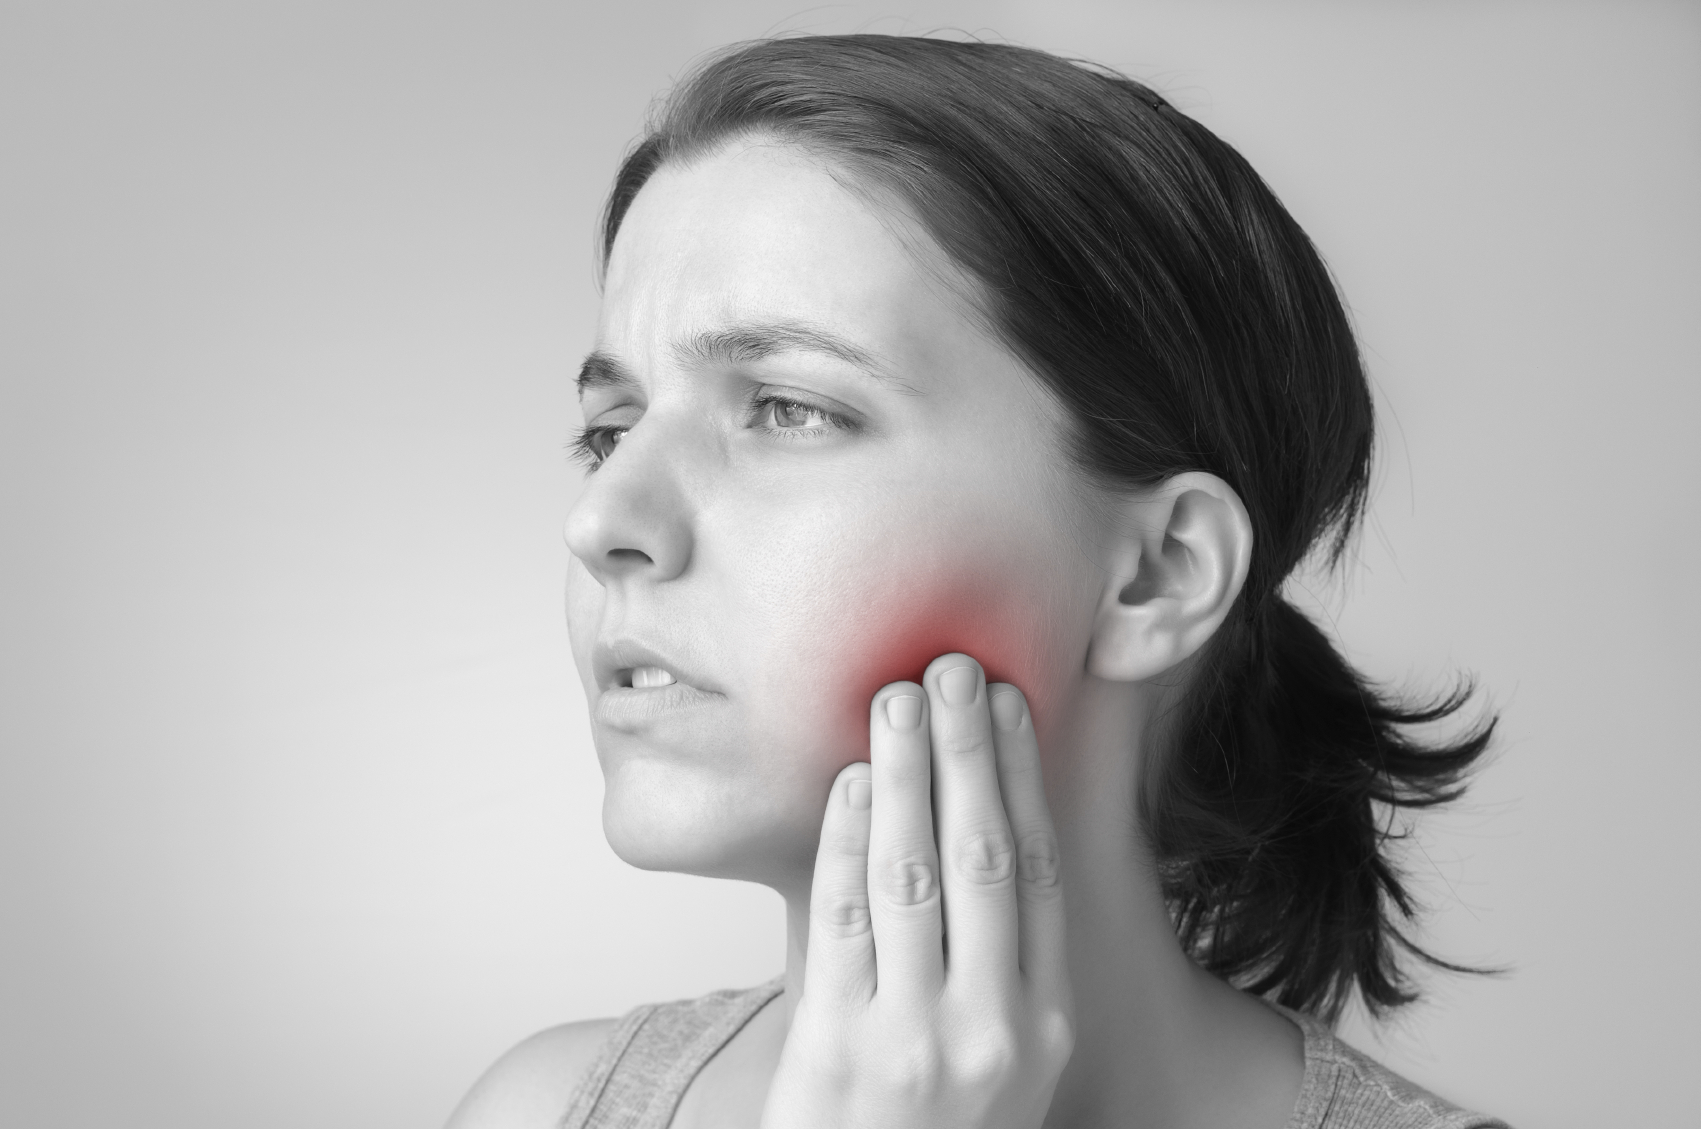 Phantom tooth syndrome: what it is and how to treat it